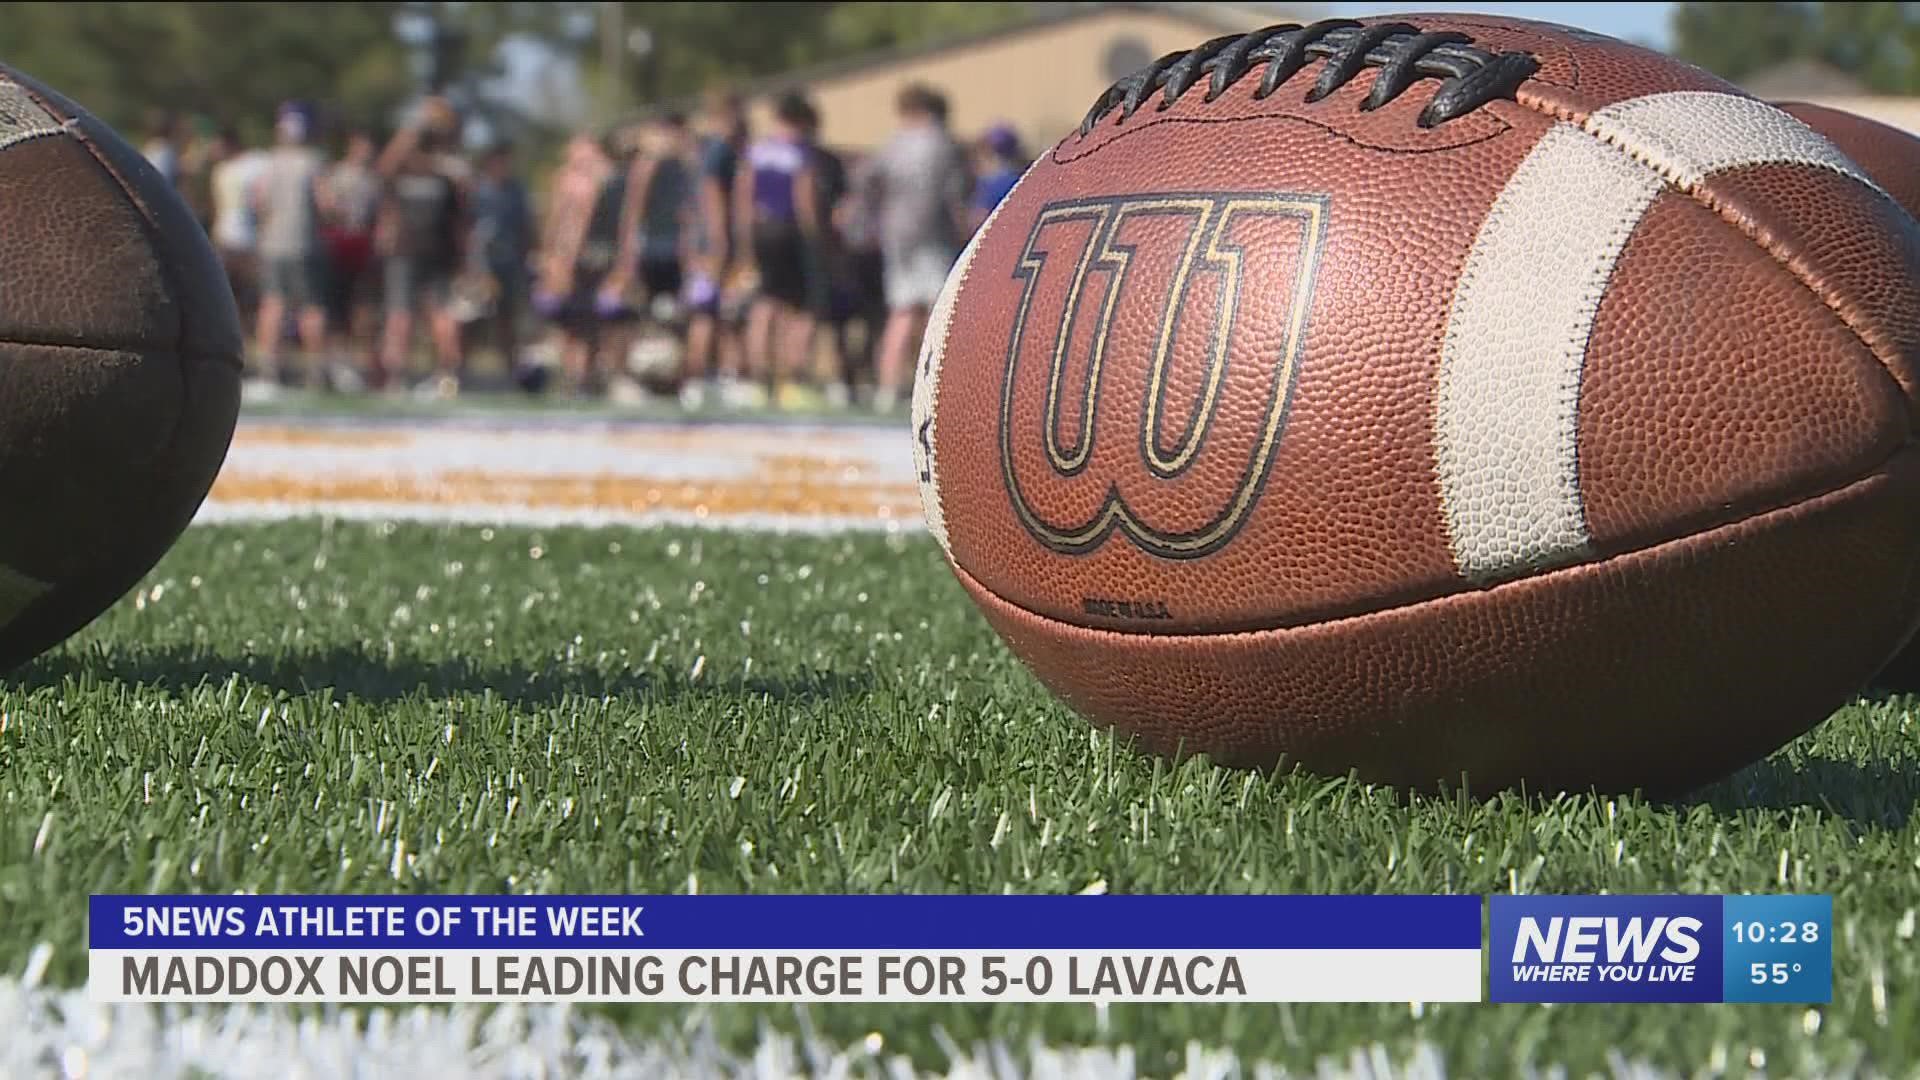 Noel's 19 total touchdowns through five games have helped Lavaca to its best start since 2005.